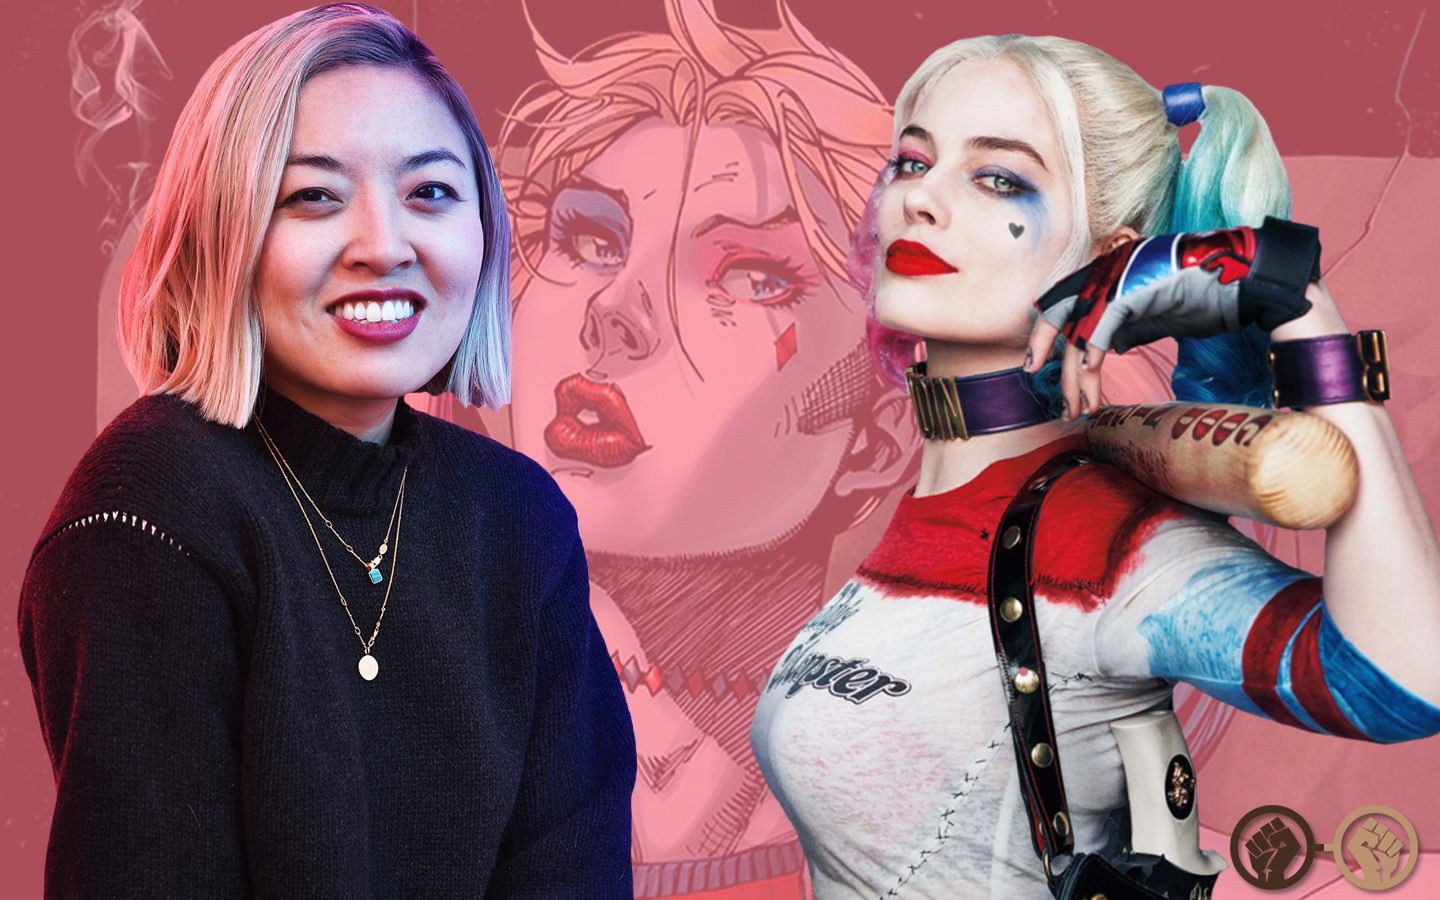 Cathy Yan Will Direct ‘Birds Of Prey’ For Warner Bros, With Margot Robbie As Harley Quinn